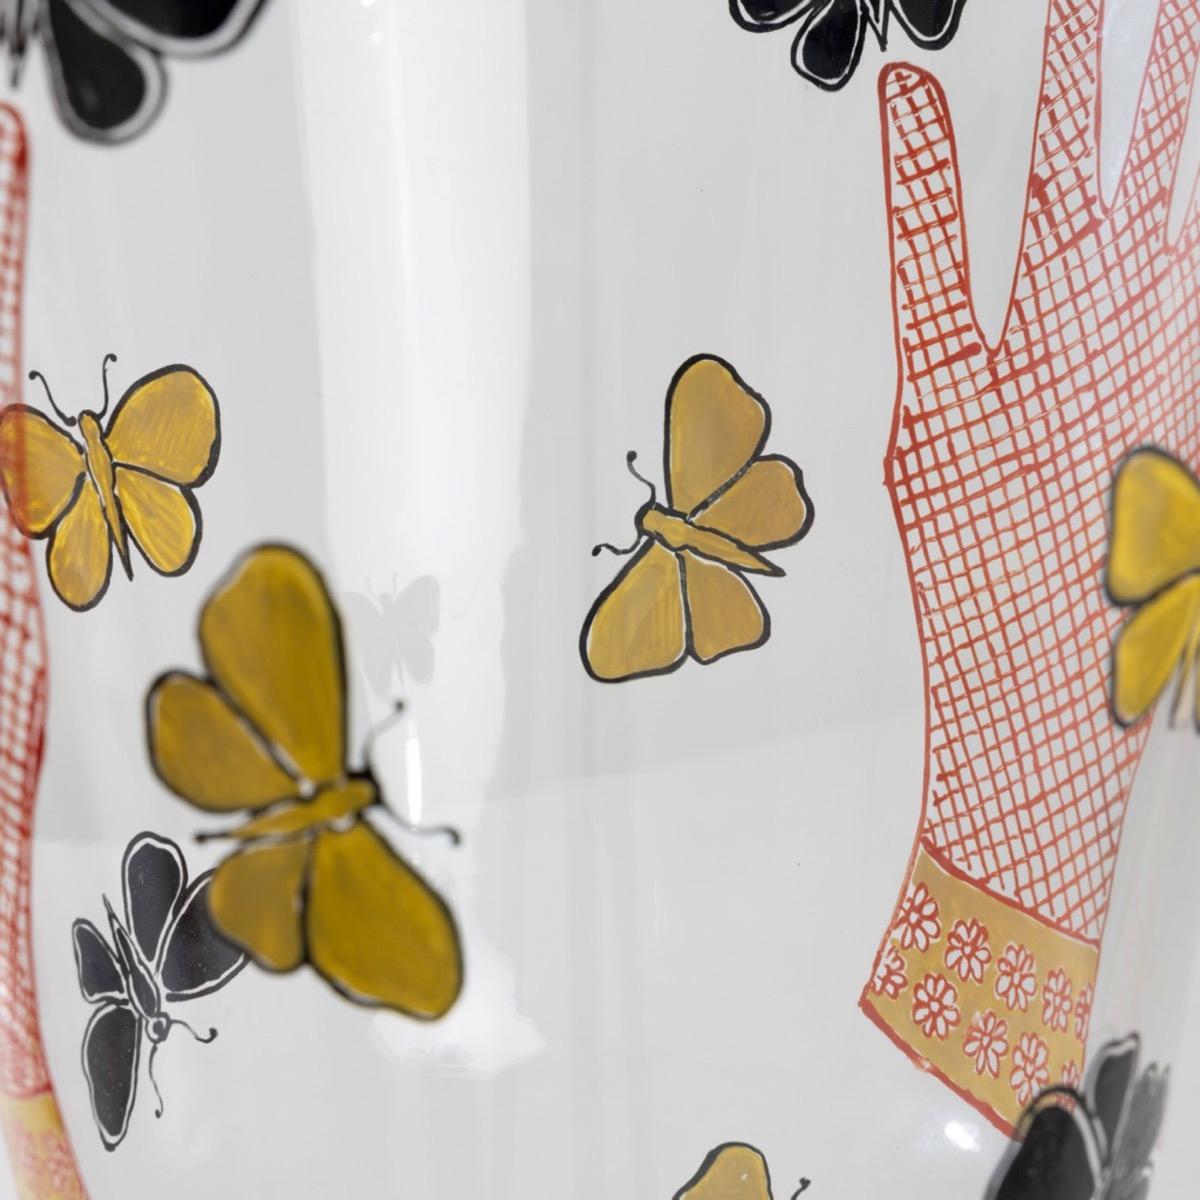 Italian Vase with Hands and Butterflies by Piero Fornasetti, S.A.L.I.R